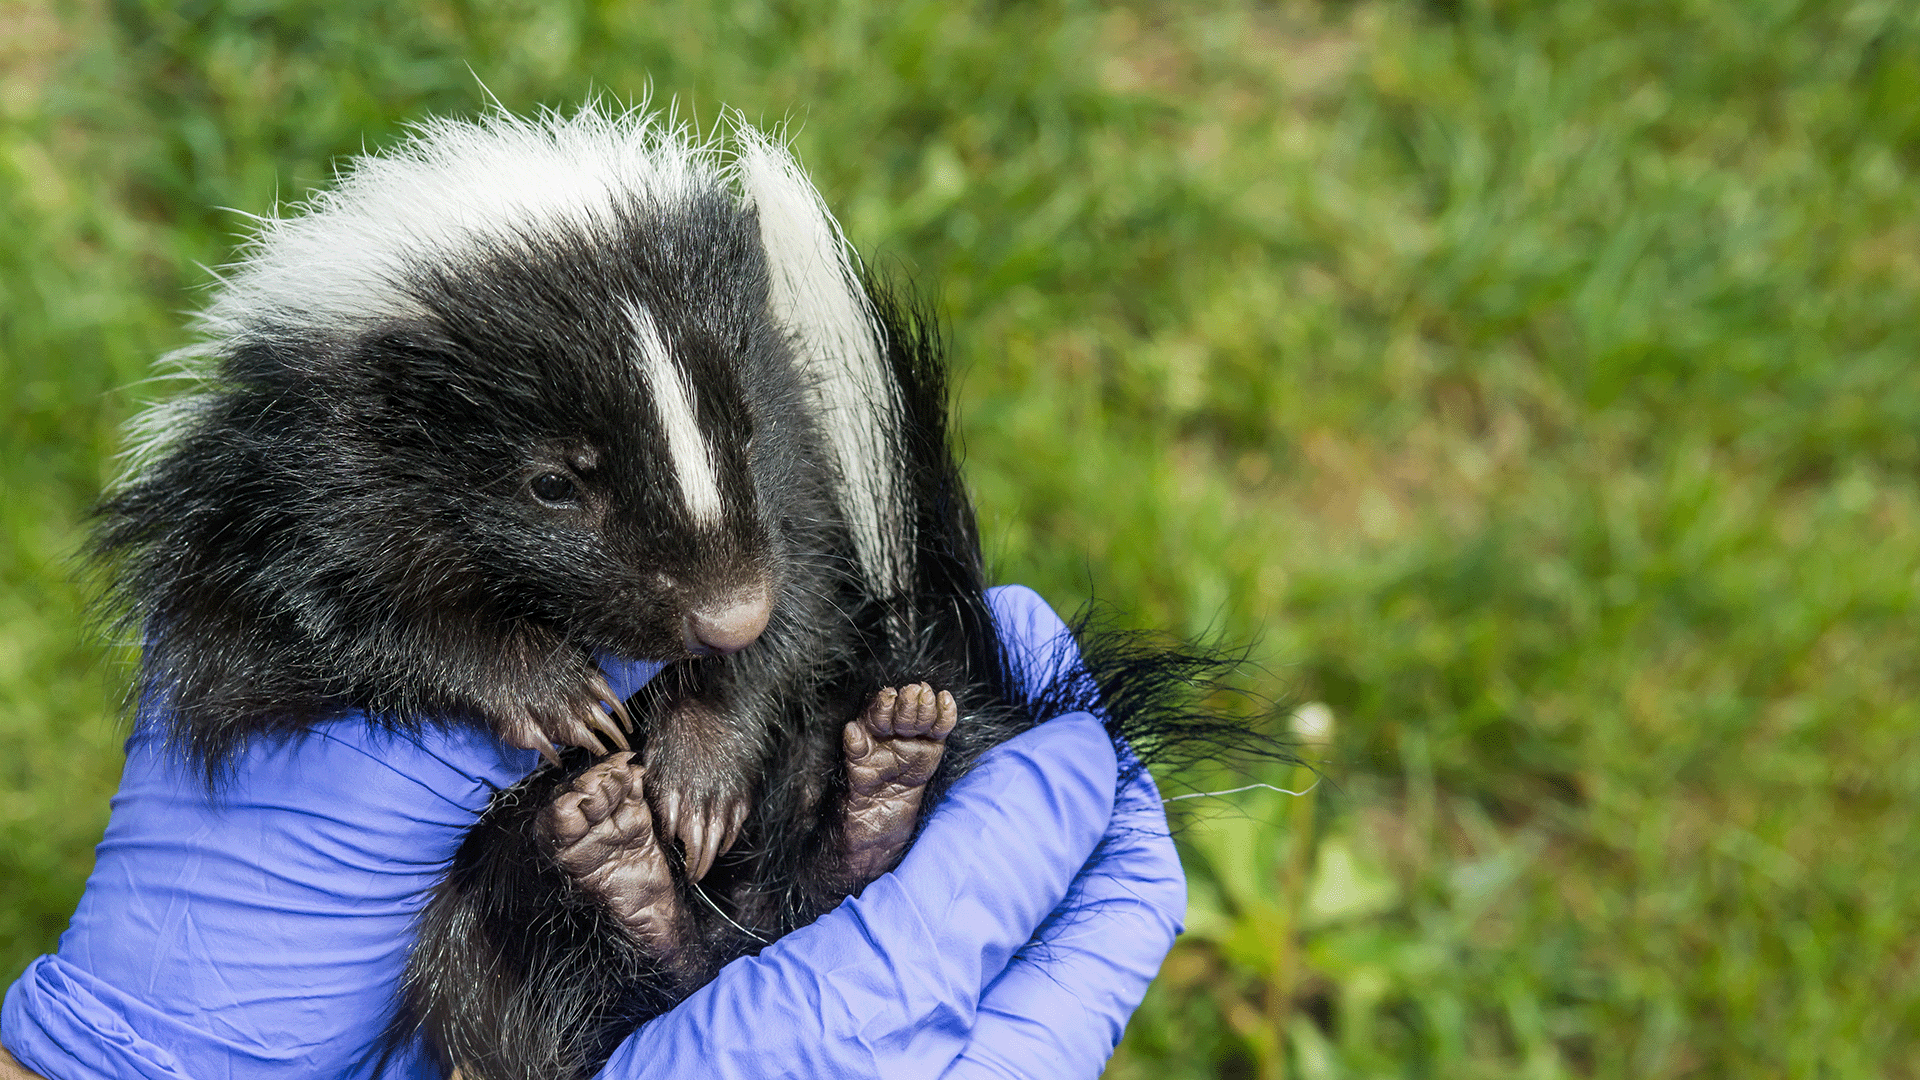 First rabid skunk found in Indiana since 2004